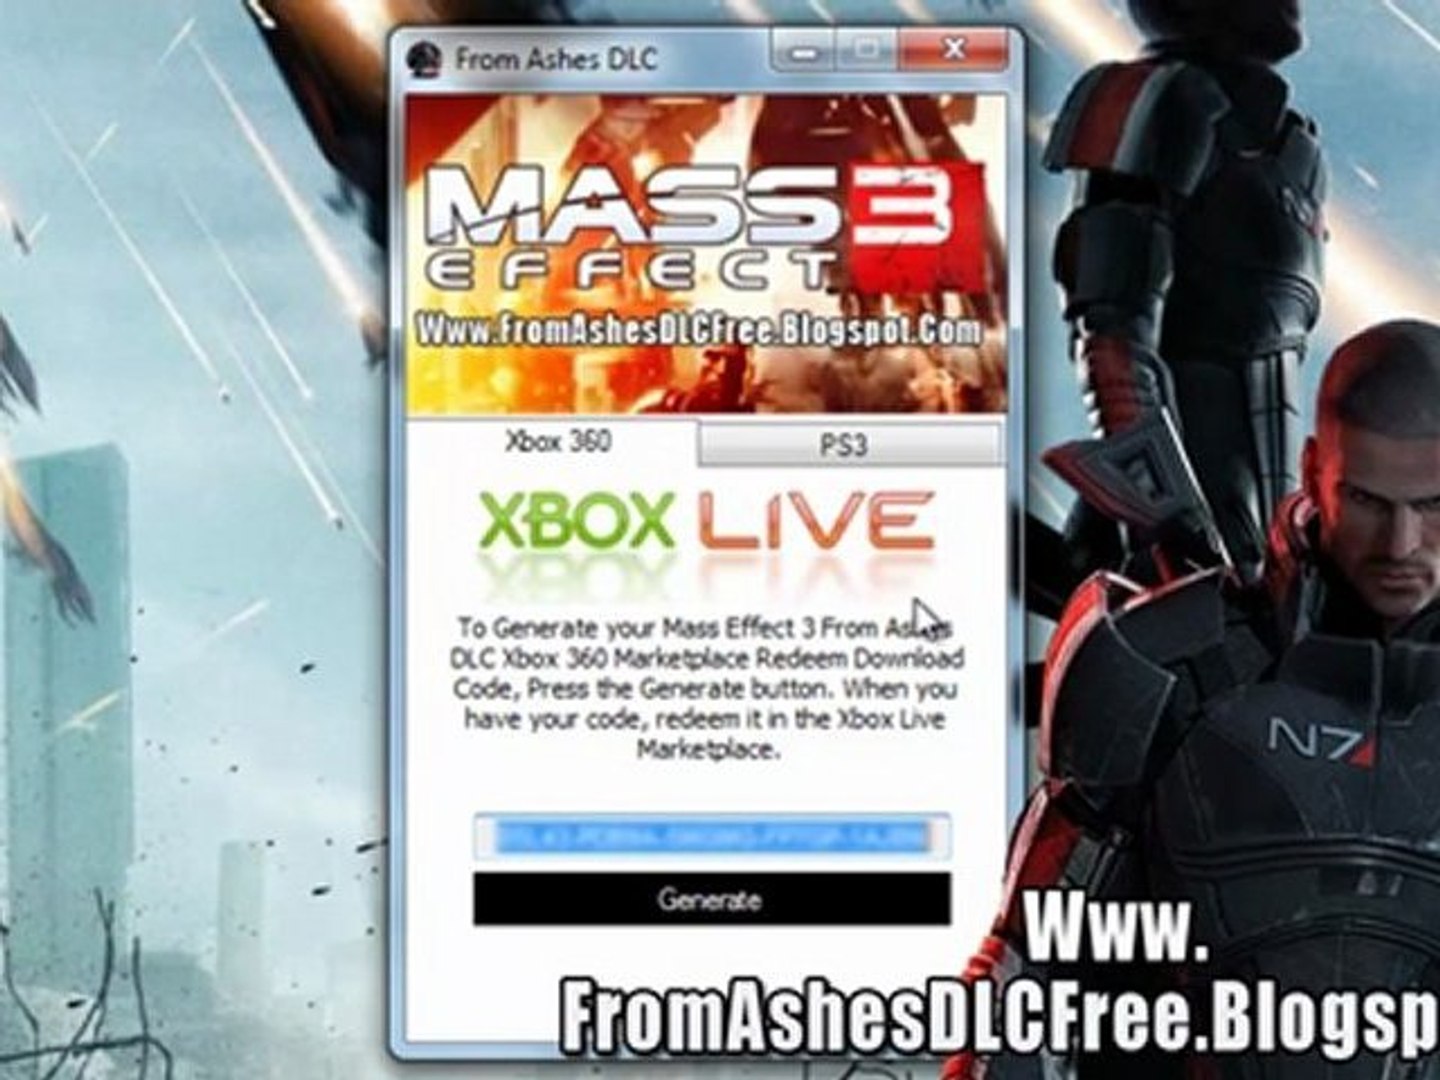 Download Mass Effect 3 From Ashes DLC - Xbox 360 / PS3 - video Dailymotion